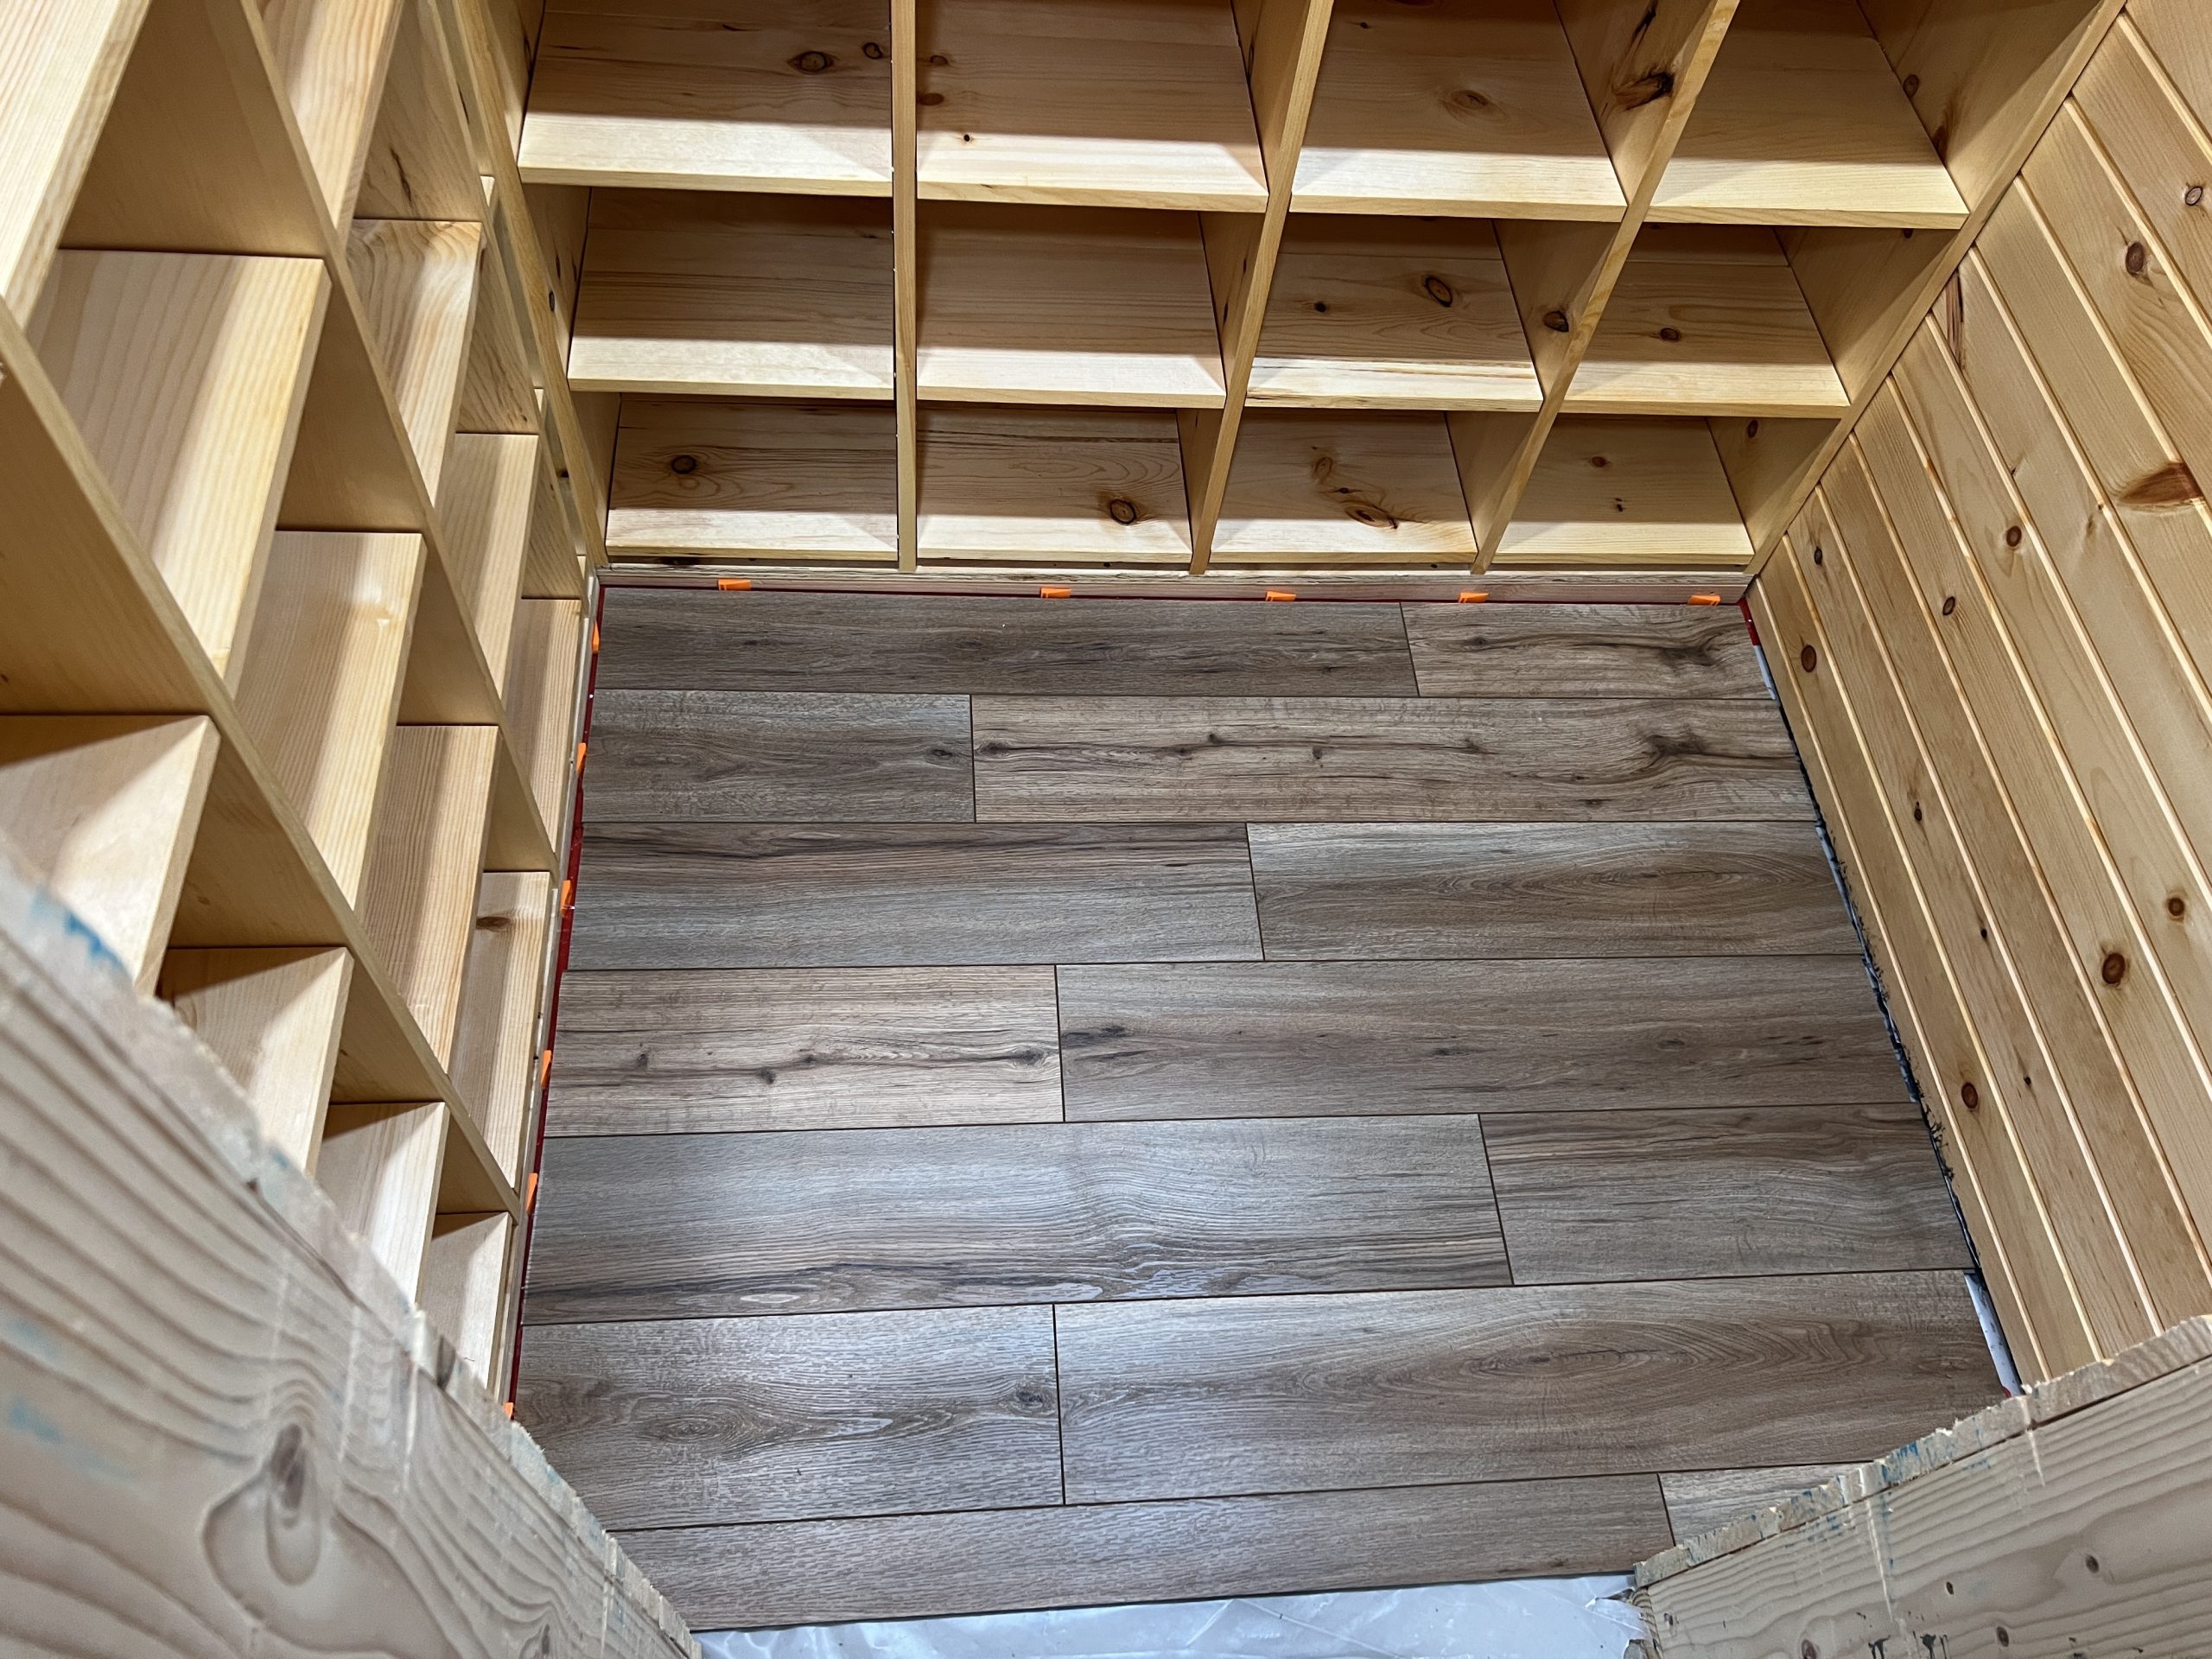 A floating snap-together vinyl plank floor, installed in the wine cellar. The flooring is meant to look like oak, and looks surprisingly realistic. 